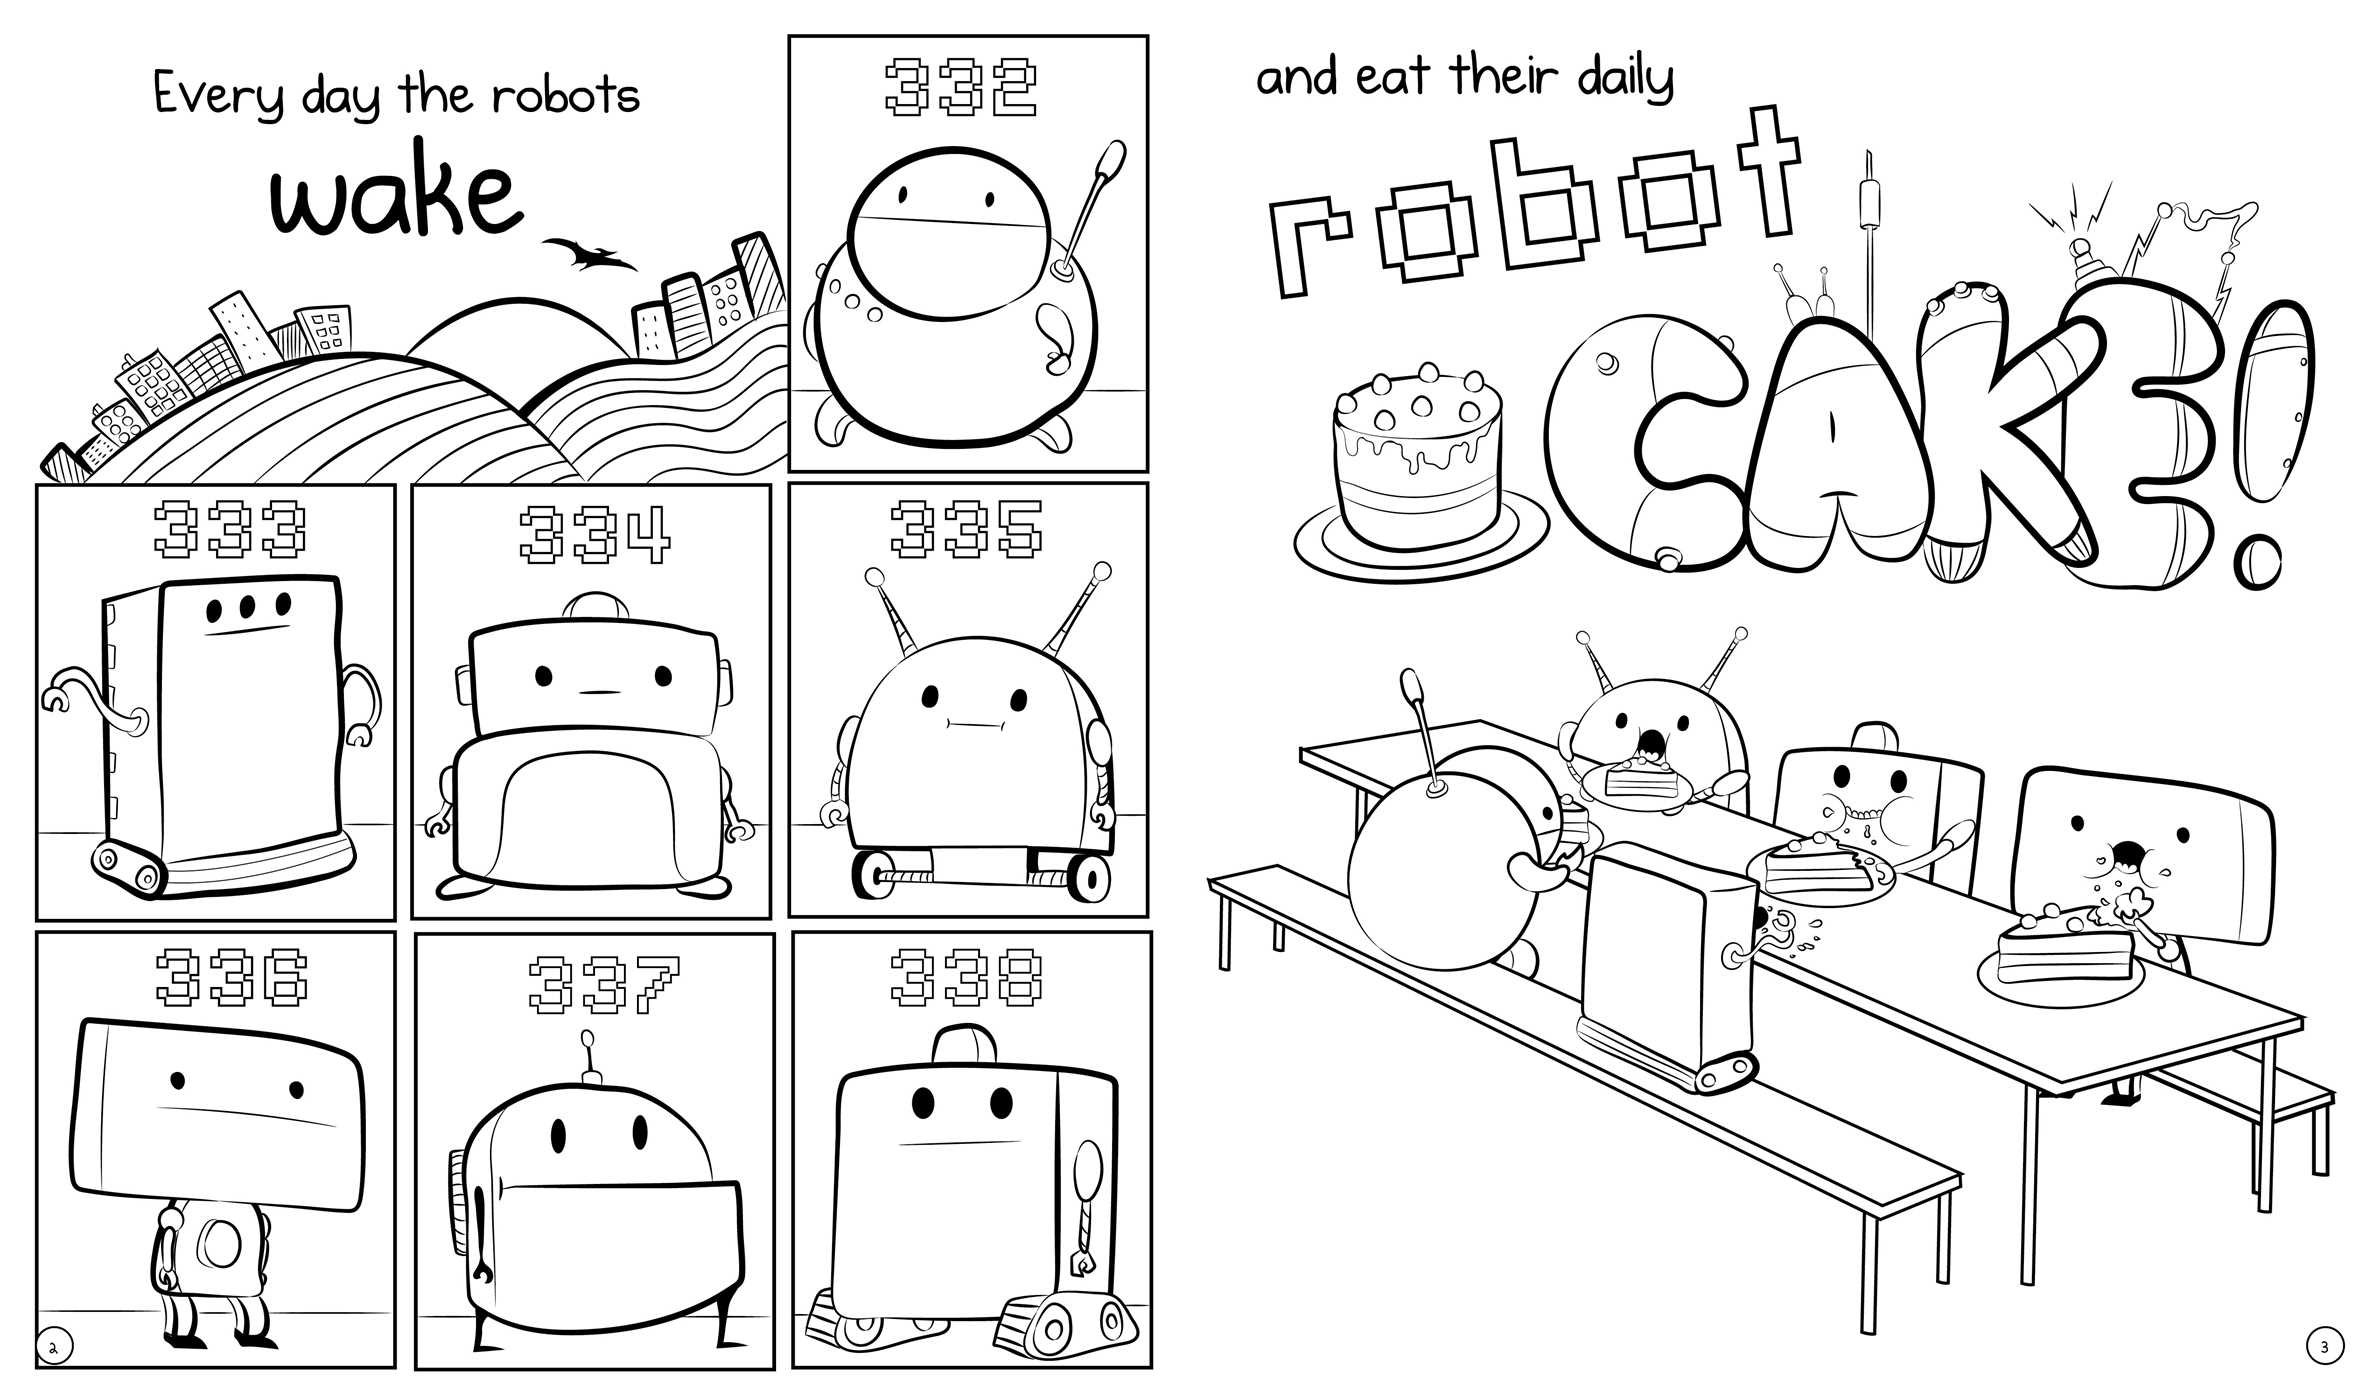 404 Not Found: A Coloring Book by The Oatmeal (Volume 6)